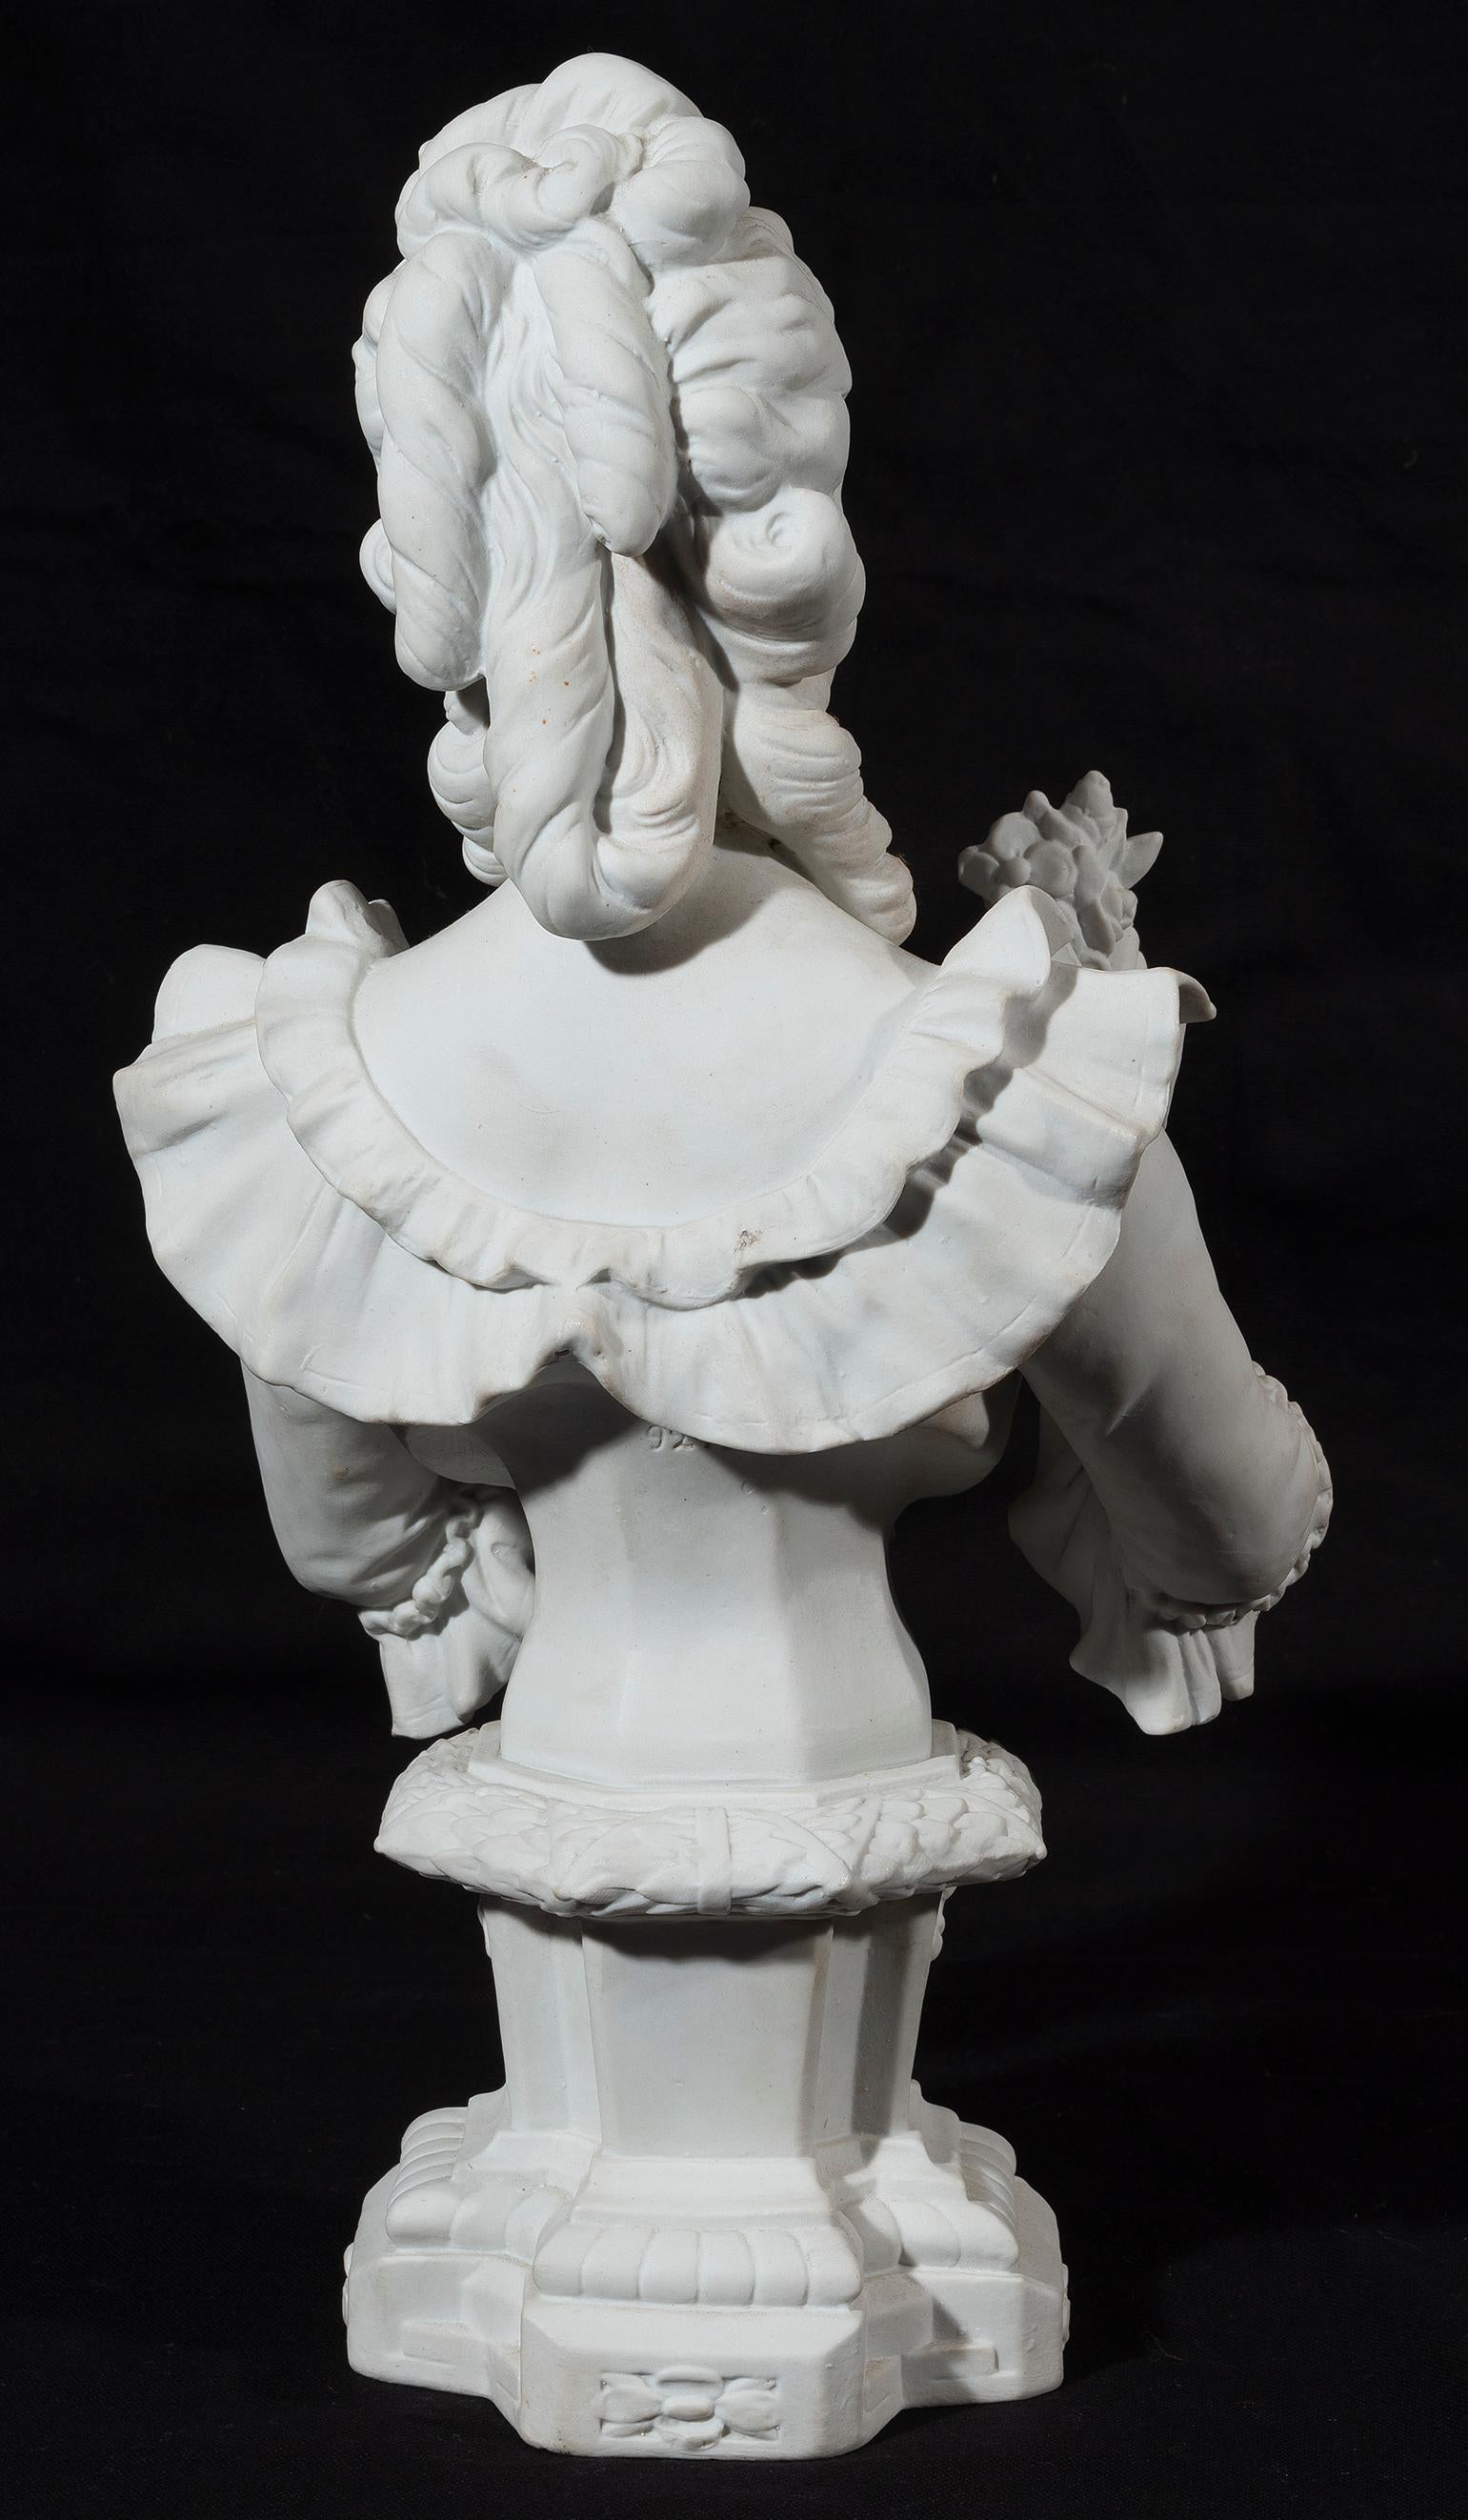 SHIPPING POLICY:
No additional costs will be added to this order.
Shipping costs will be totally covered by the seller (customs duties included). 

Quarter length white glazed moulded bust raised on fluted gilt and cobalt blue column initialled